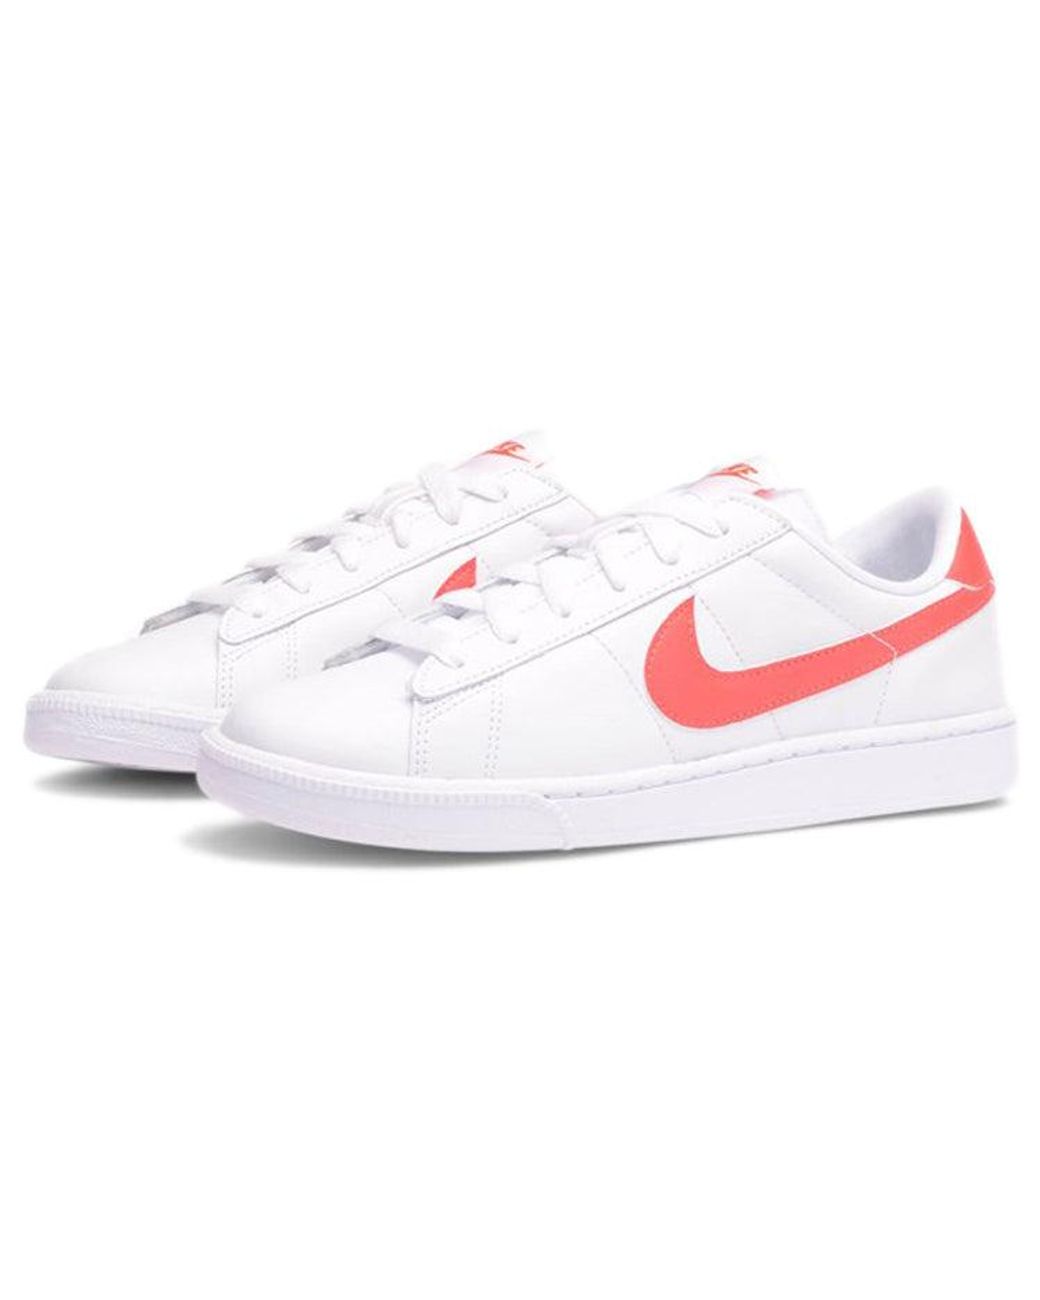 Nike Tennis Classic White/red | Lyst